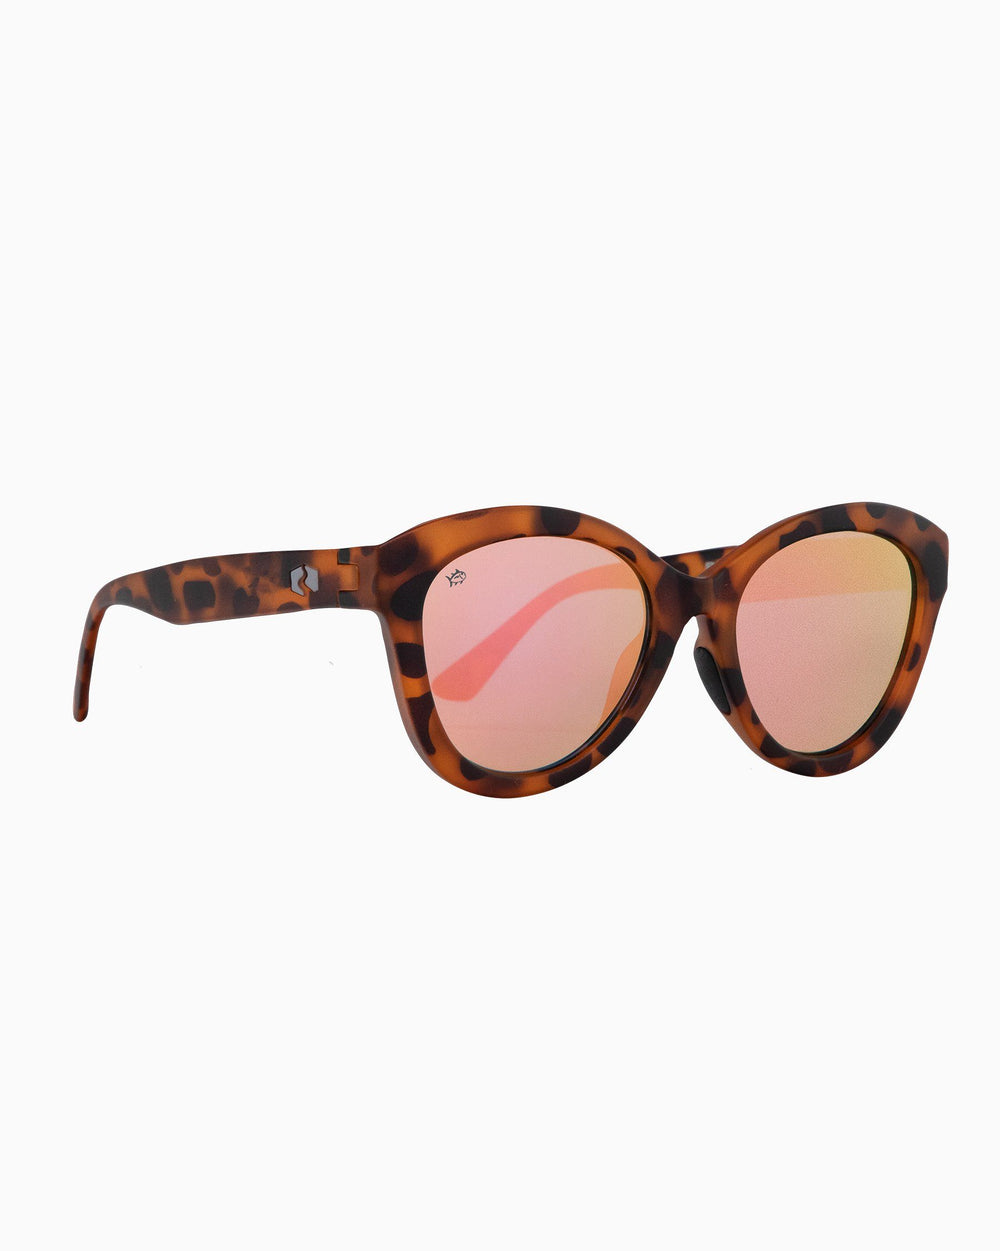 The side of the Women's Rheos Faris Sunglasses by Southern Tide - Tortoise Rose